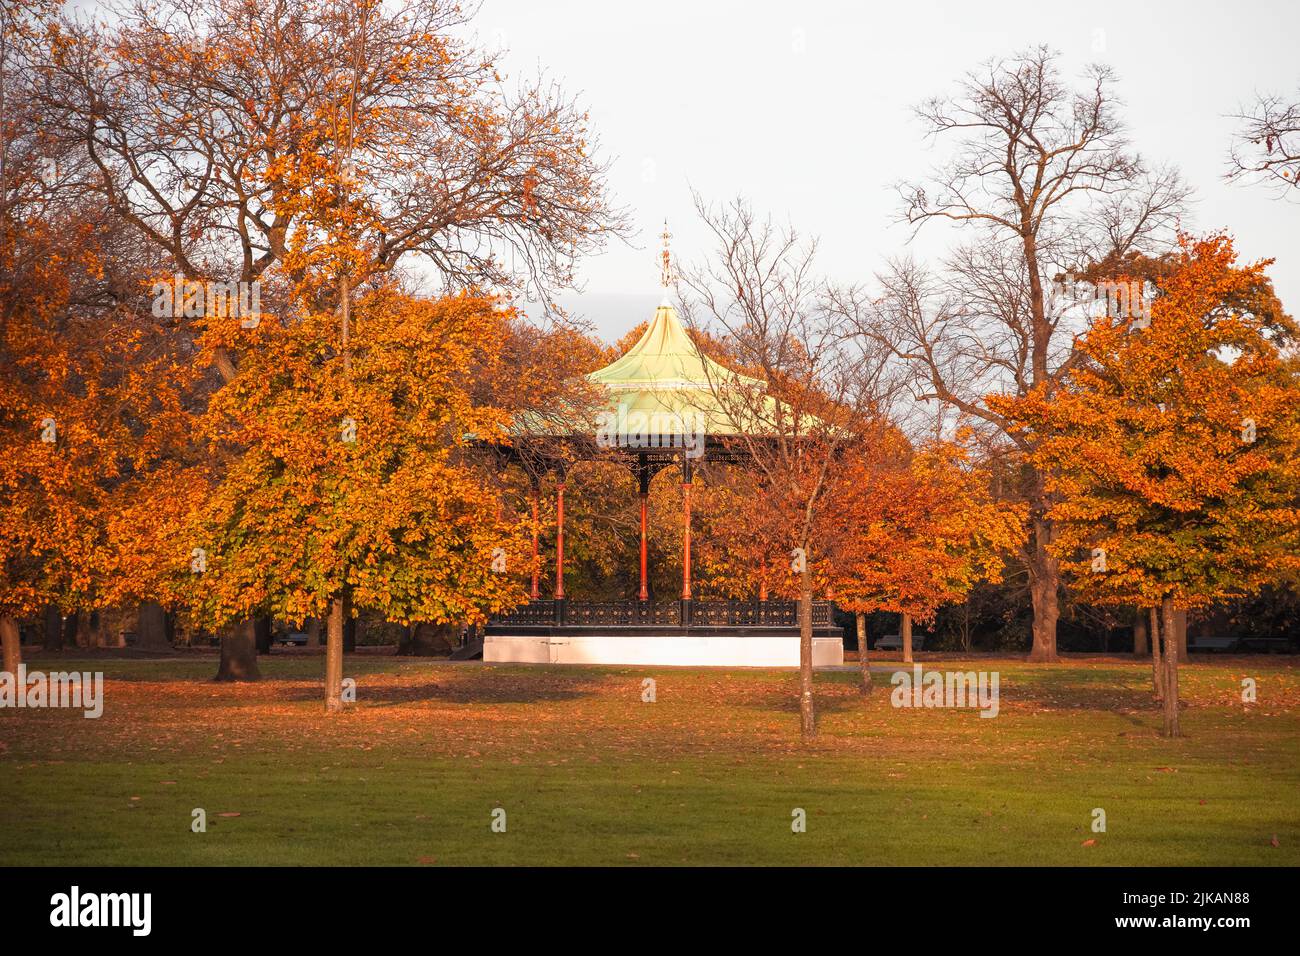 Autumn scene with Greenwich Park bandstand in London, England Stock Photo